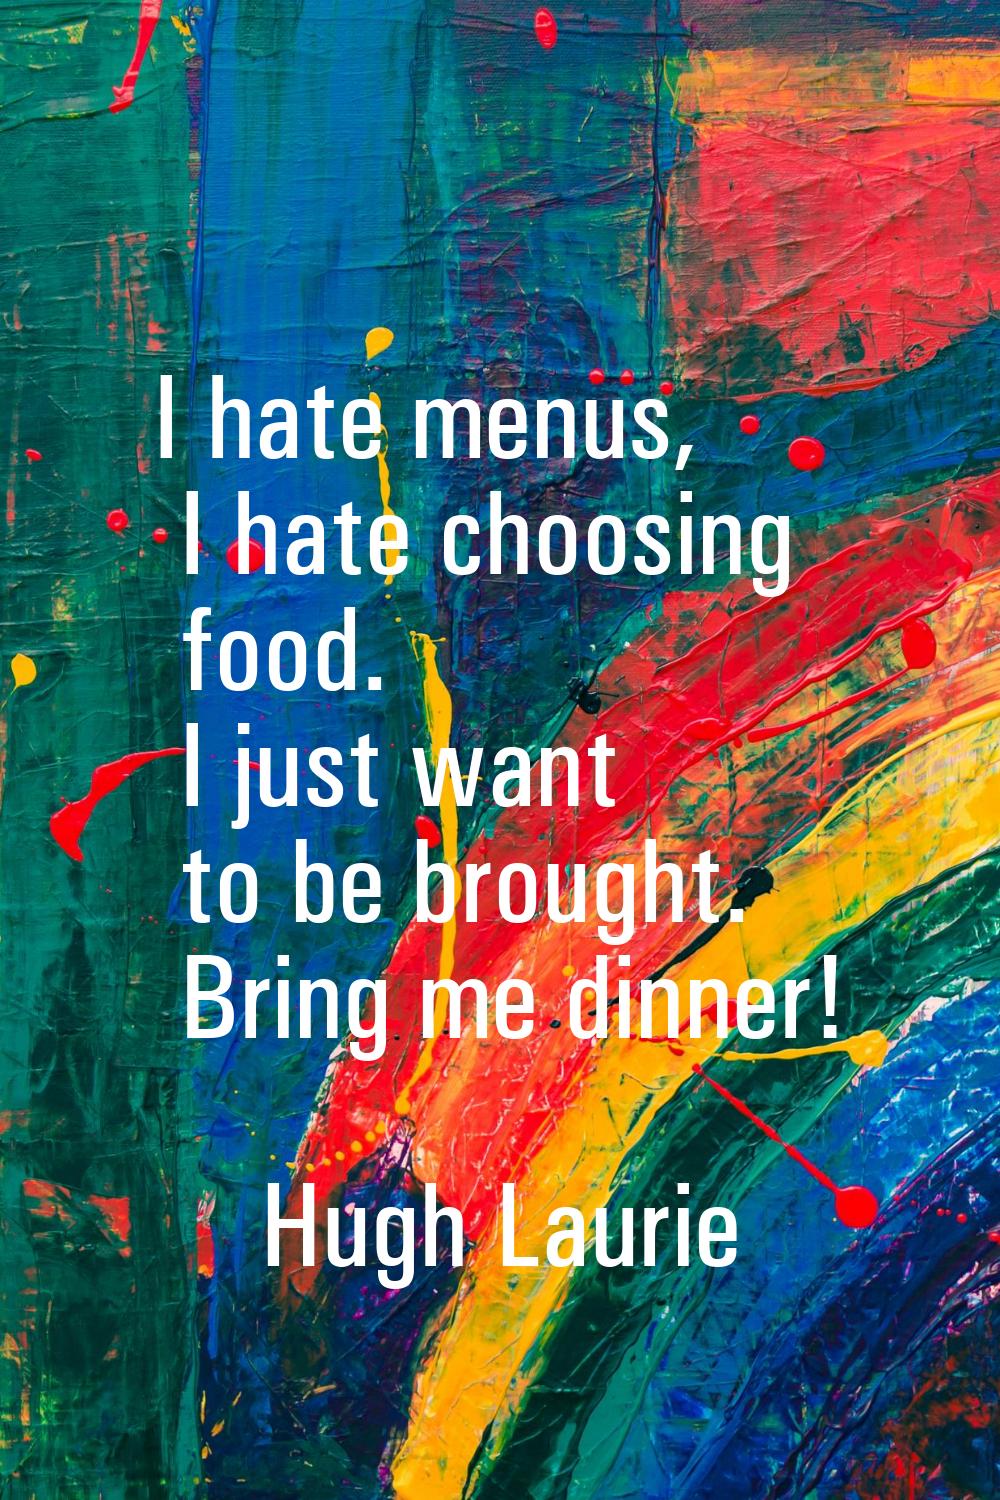 I hate menus, I hate choosing food. I just want to be brought. Bring me dinner!